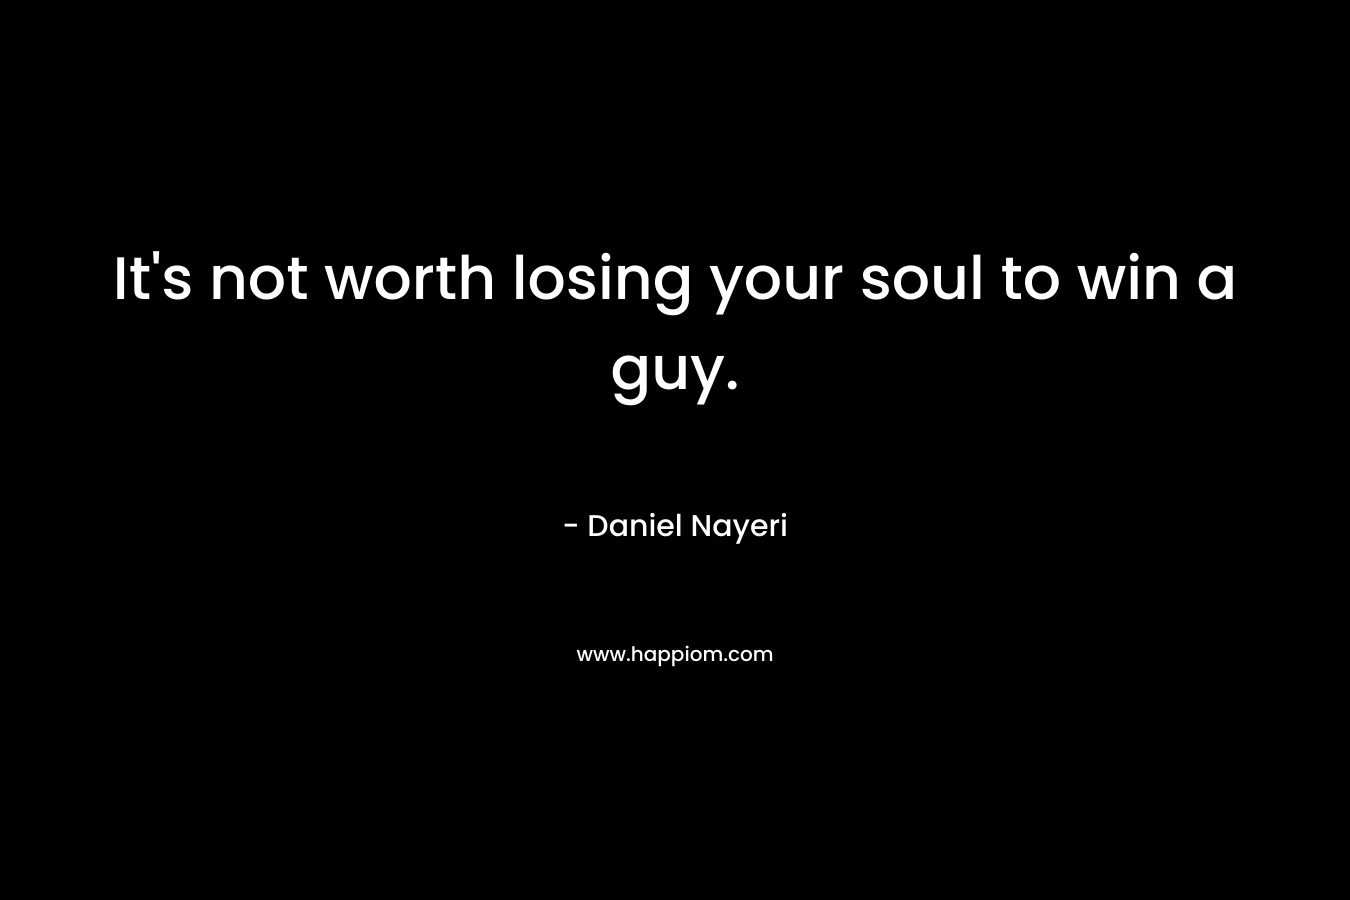 It’s not worth losing your soul to win a guy. – Daniel Nayeri